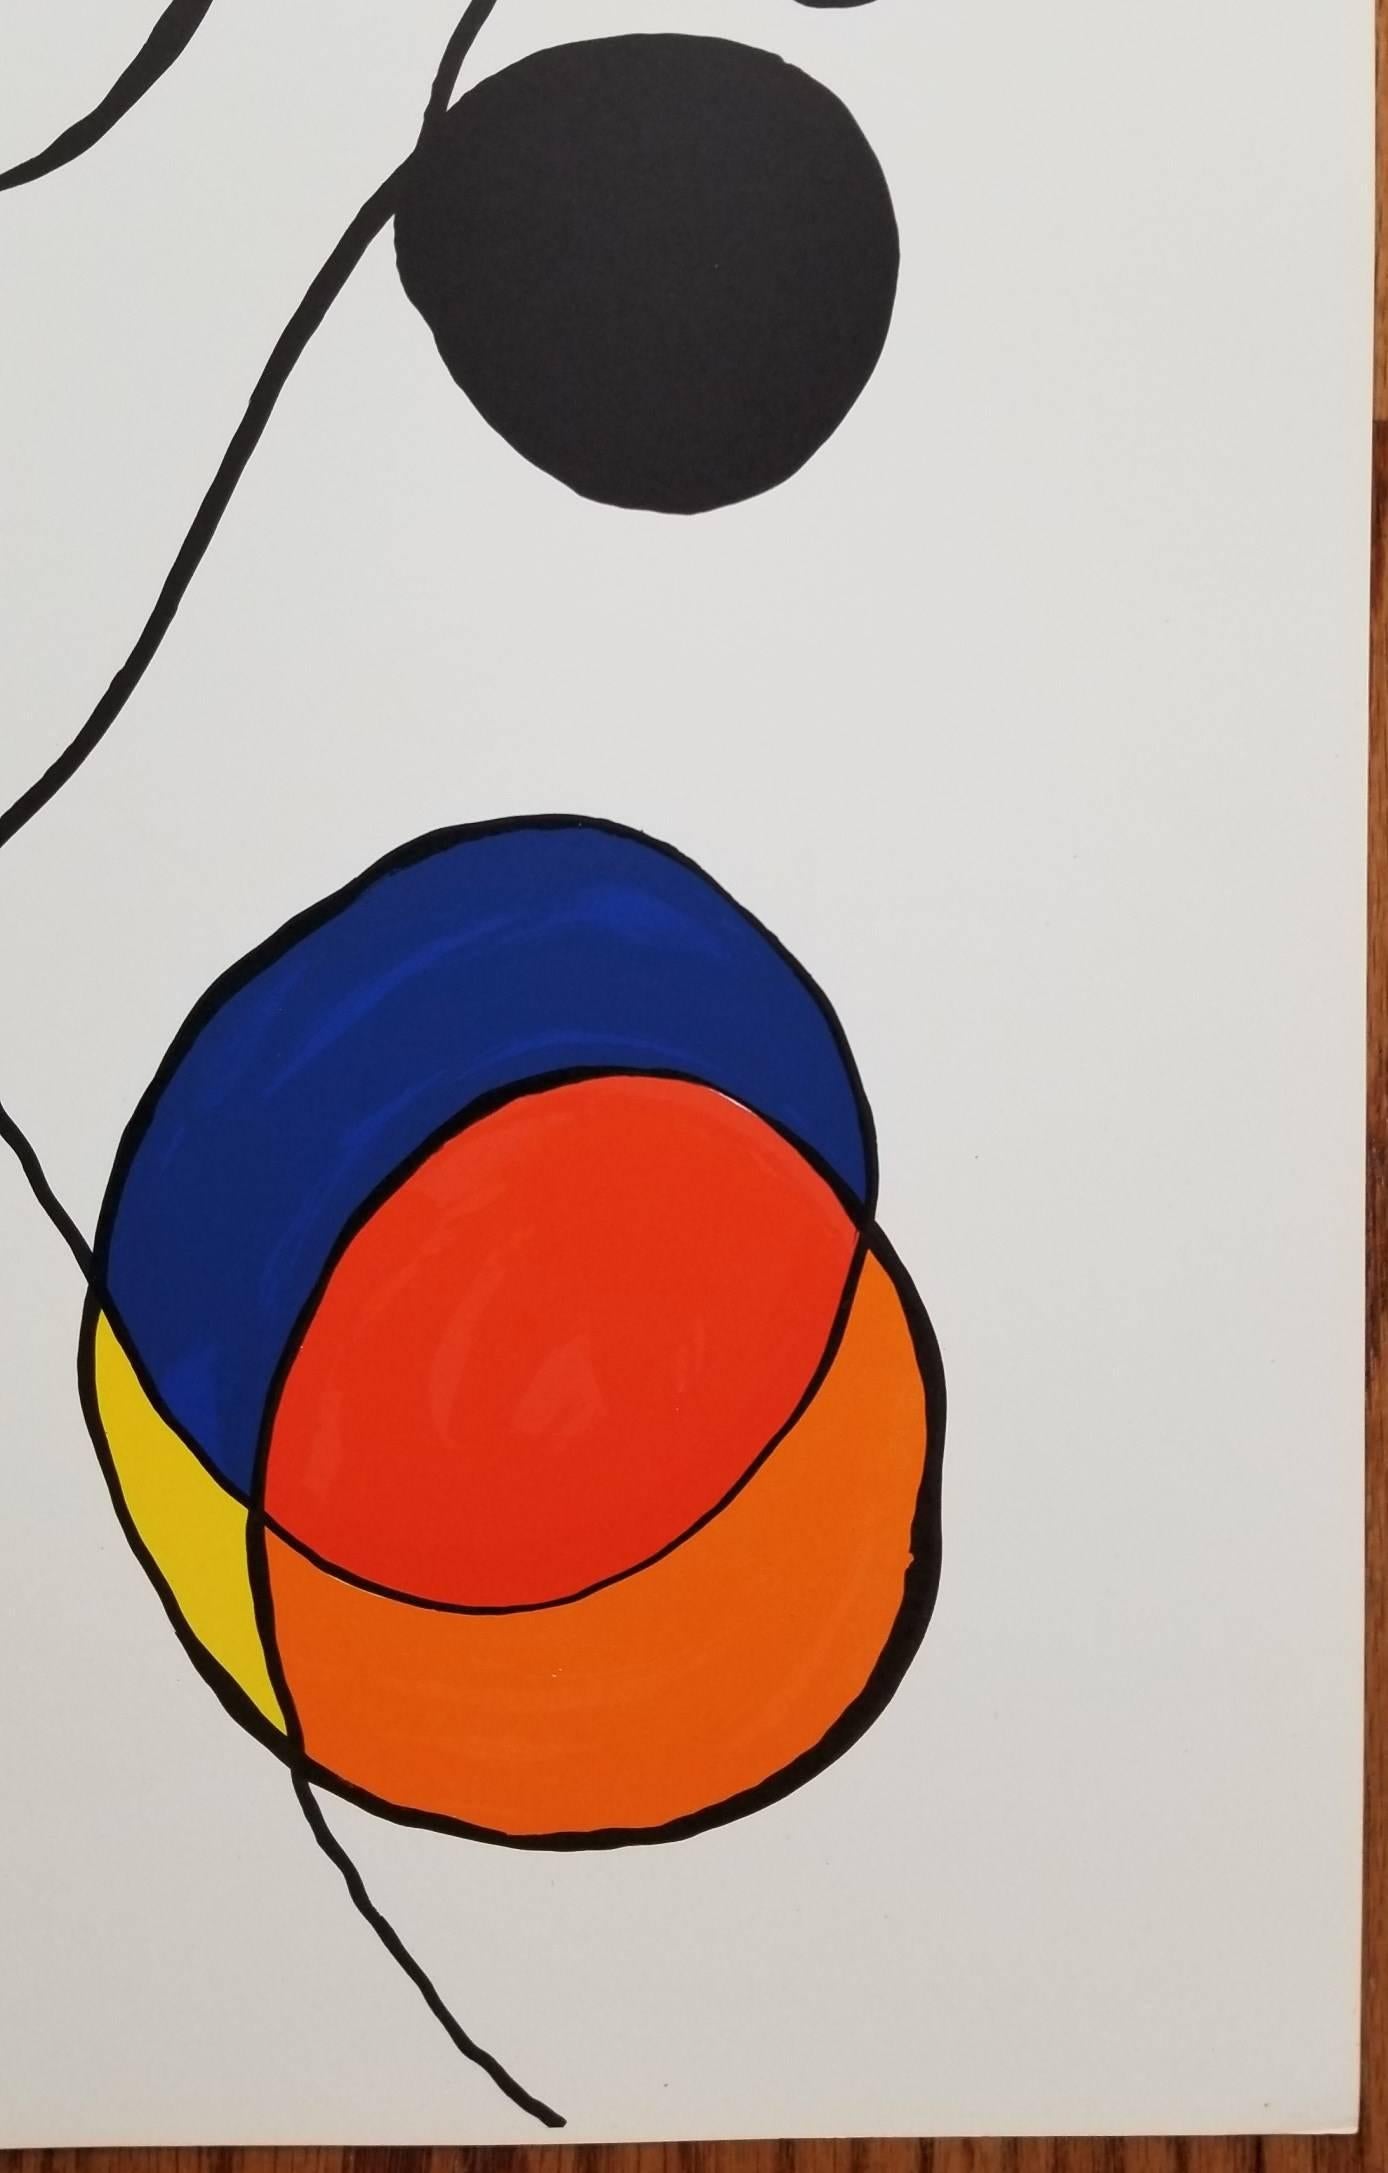 An original lithograph on smooth wove paper by American artist Alexander Calder (1898-1976) titled 